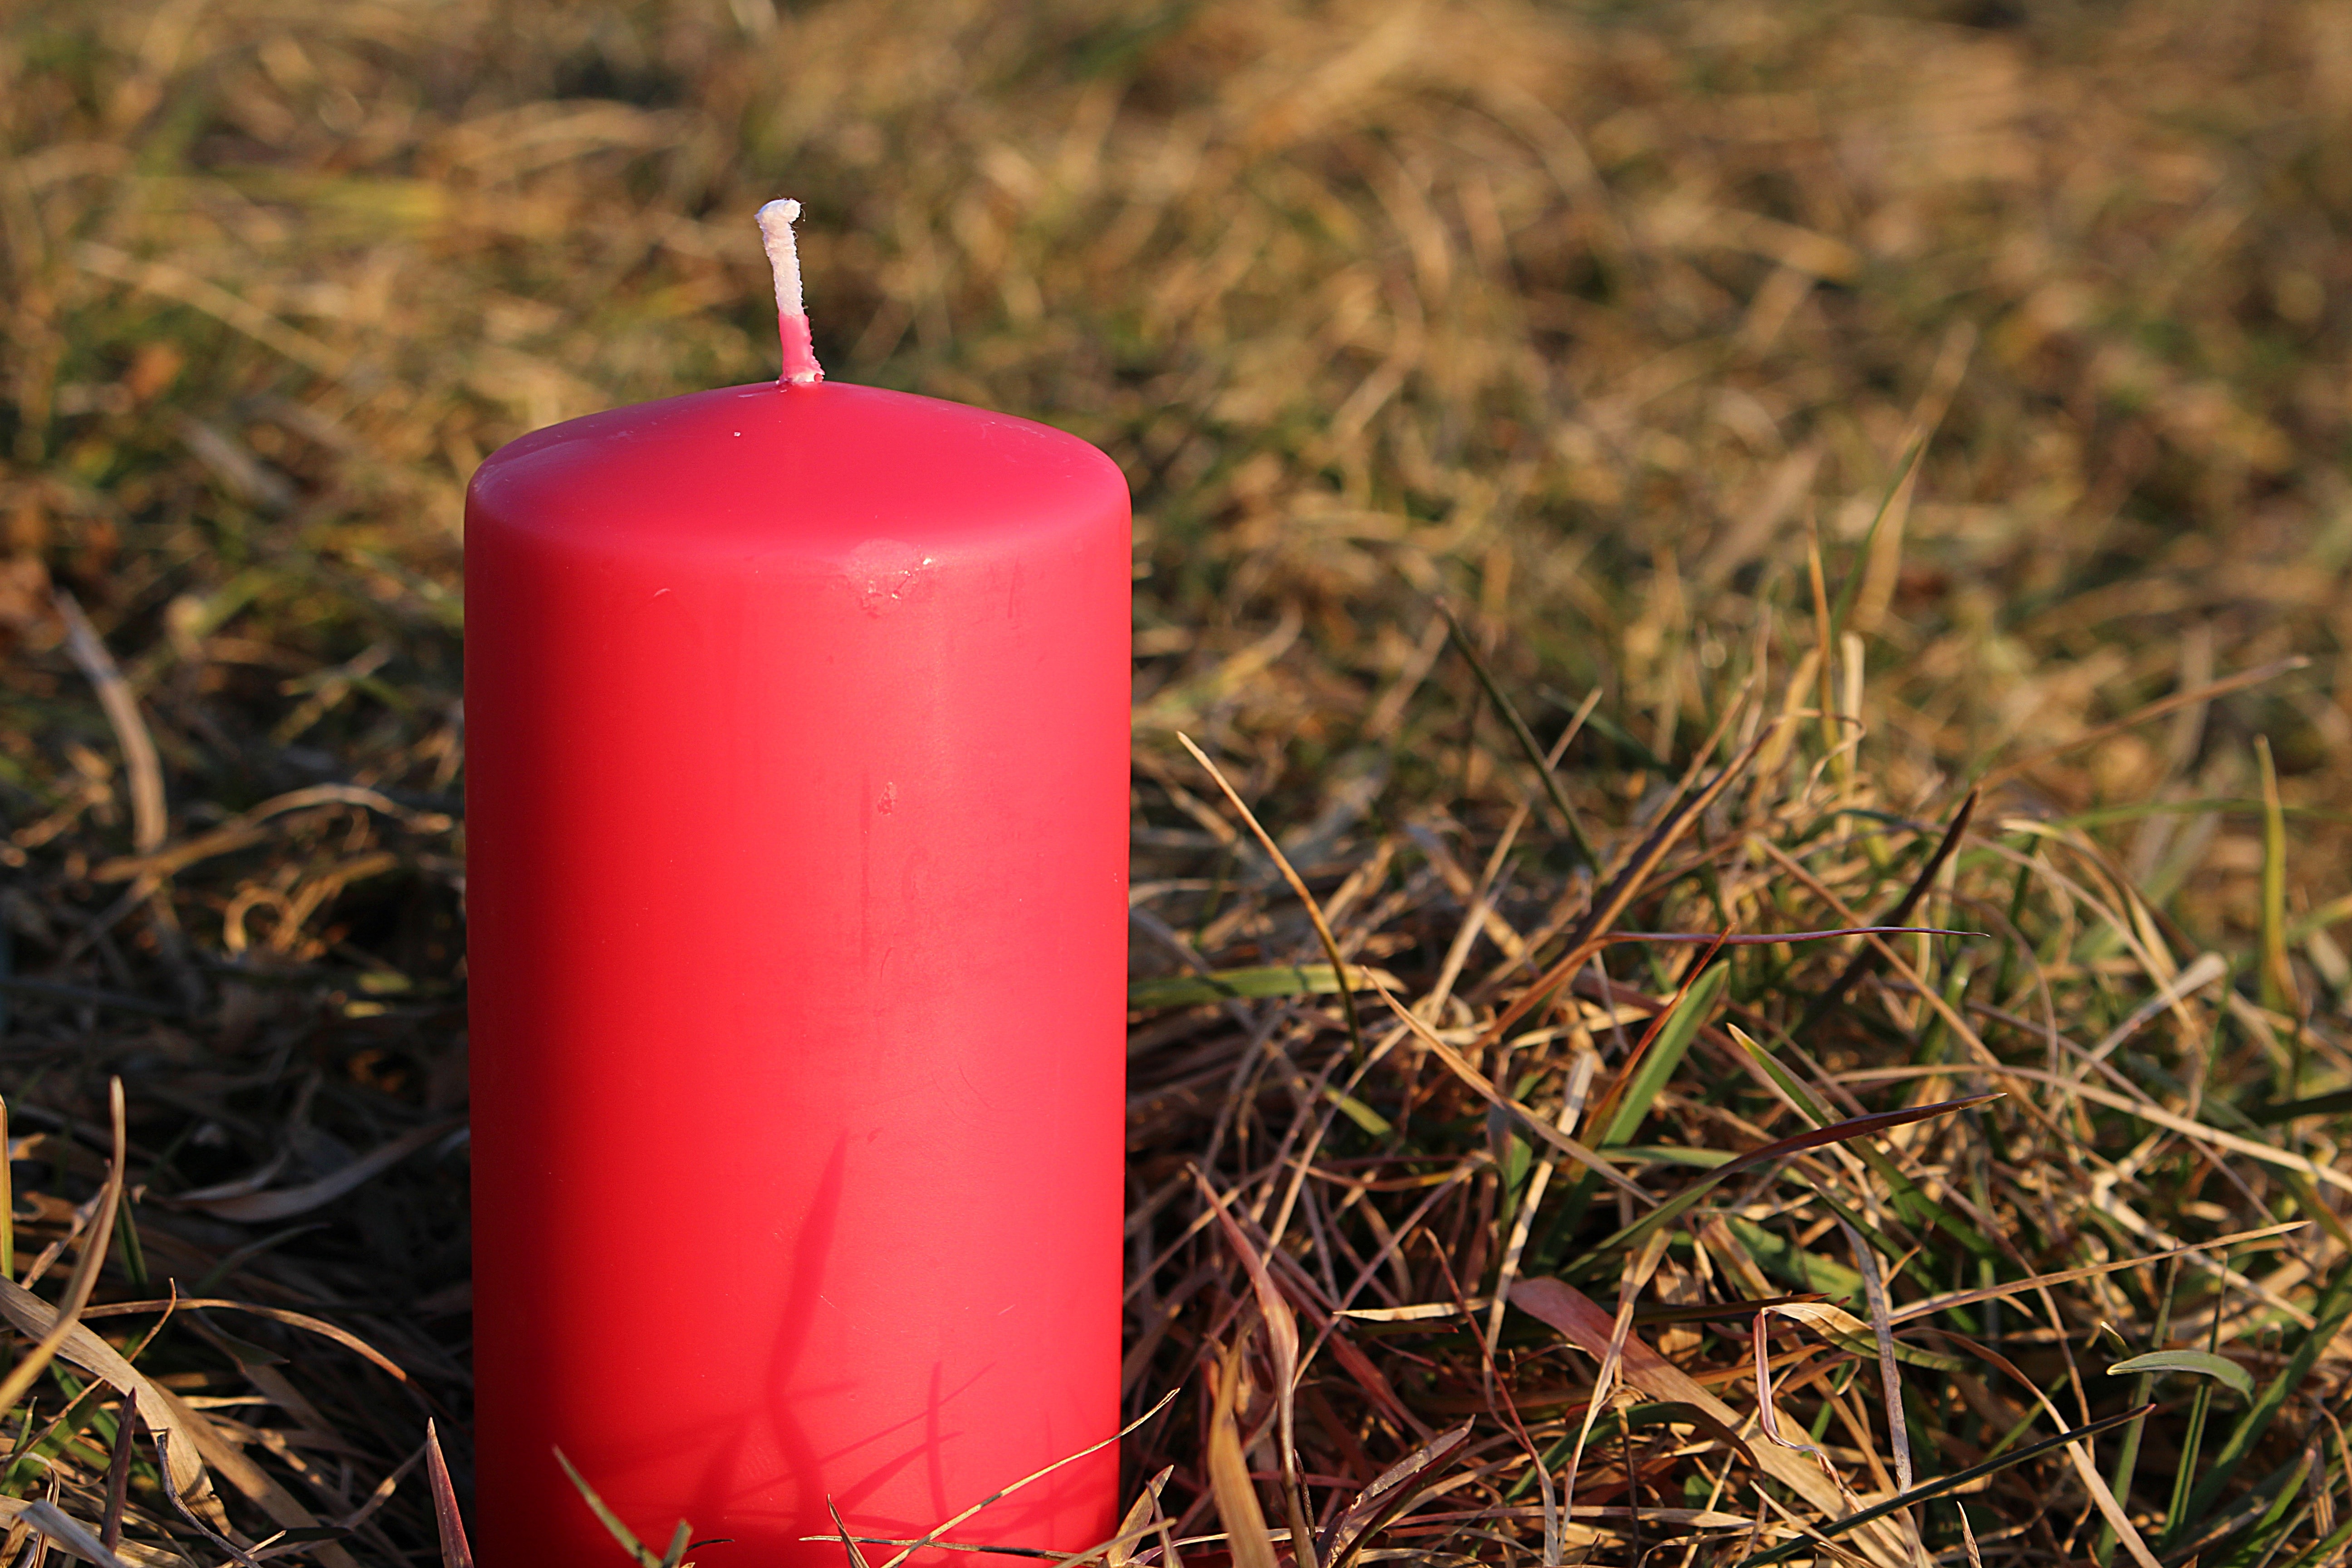 red pillar candle